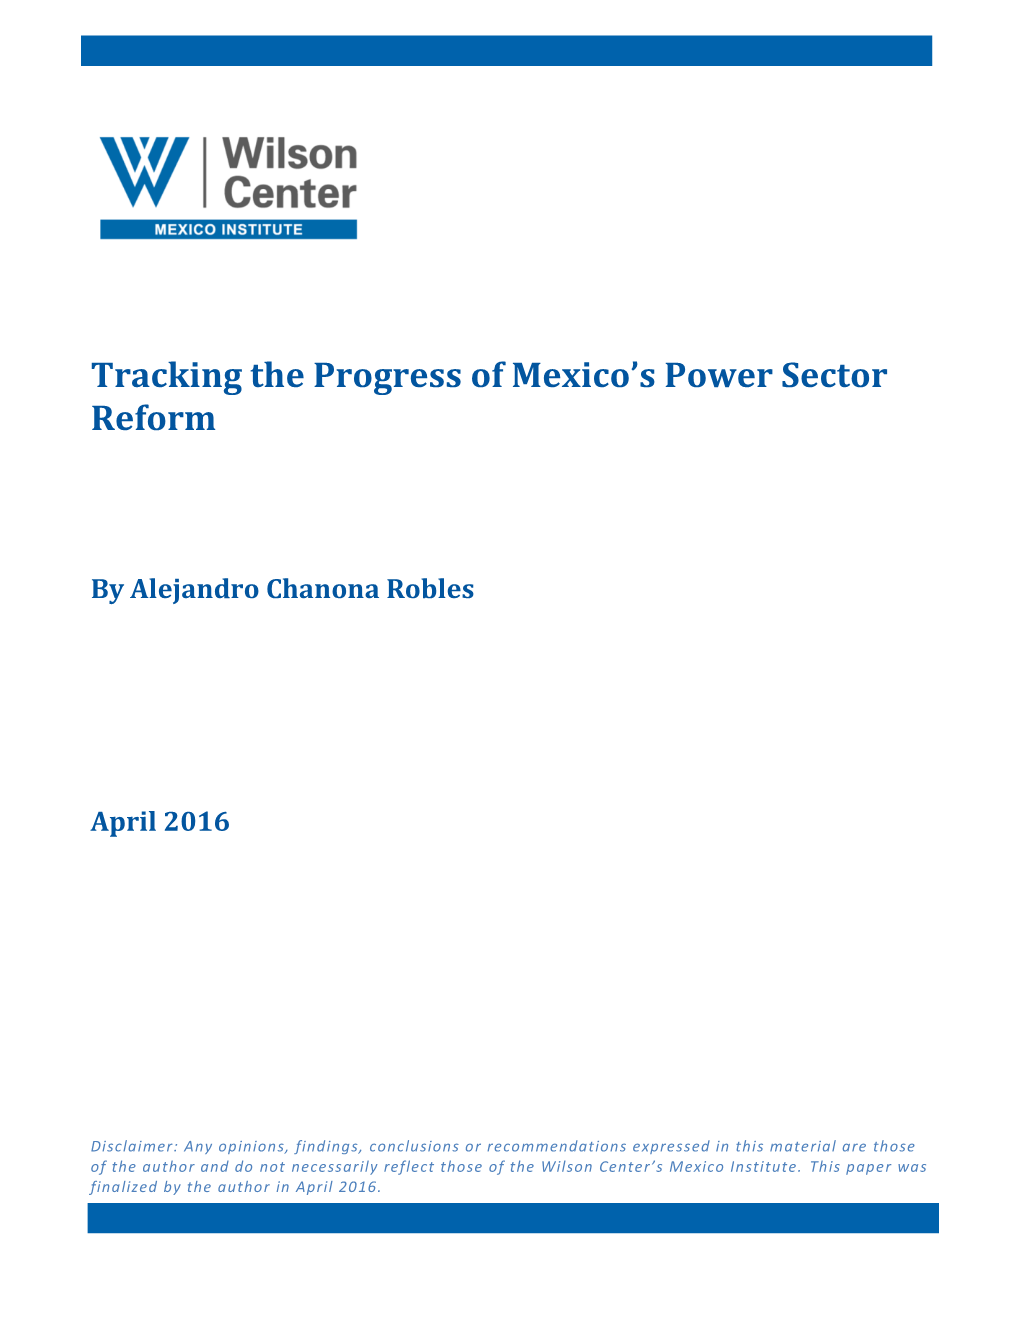 Tracking the Progress of Mexico's Power Sector Reform